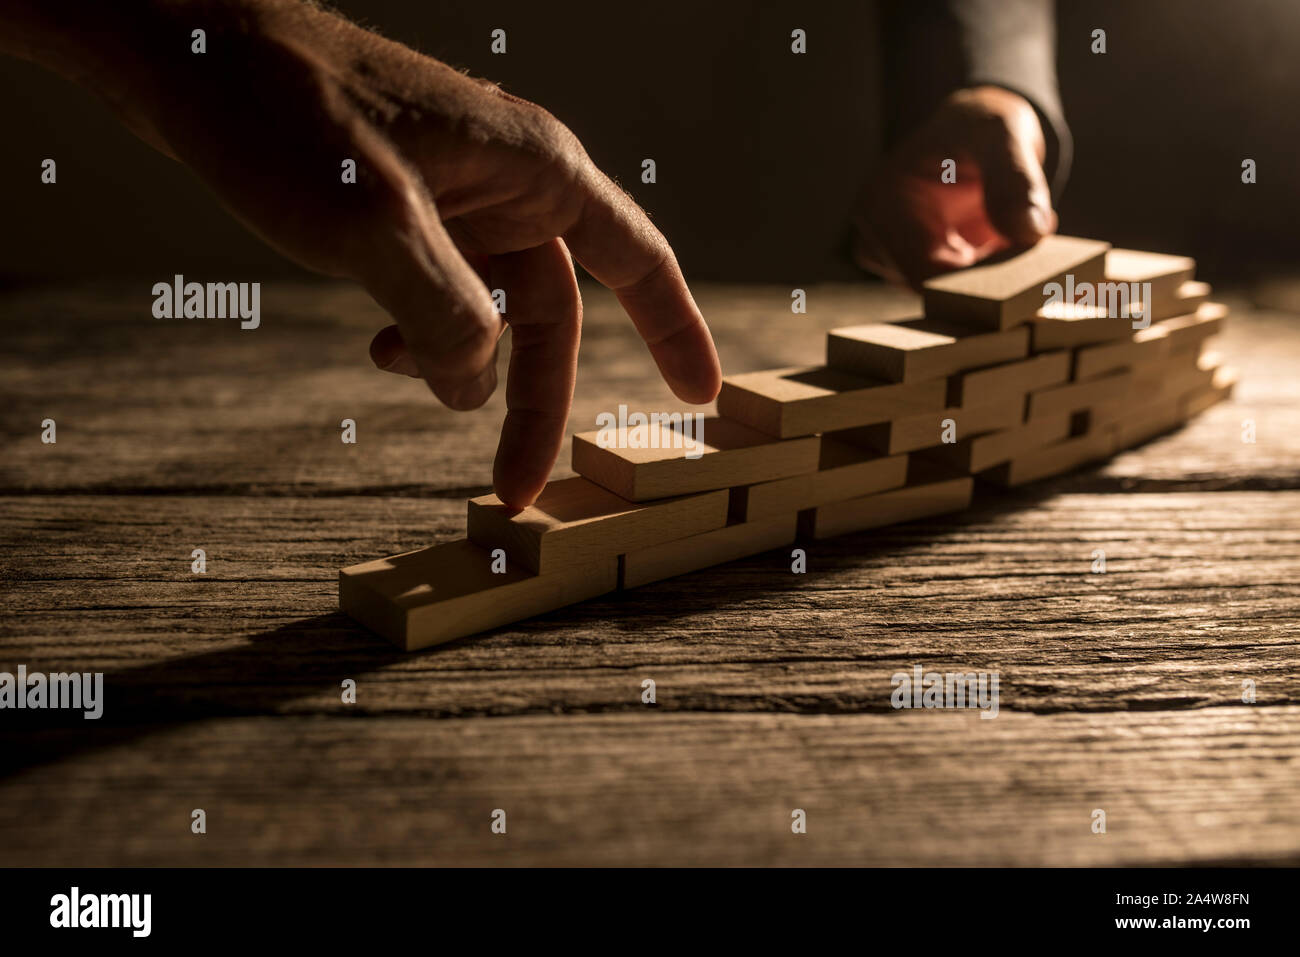 Pair of fingers walking up wooden blocks for concept about overcoming difficulty and achieving goals. Stock Photo